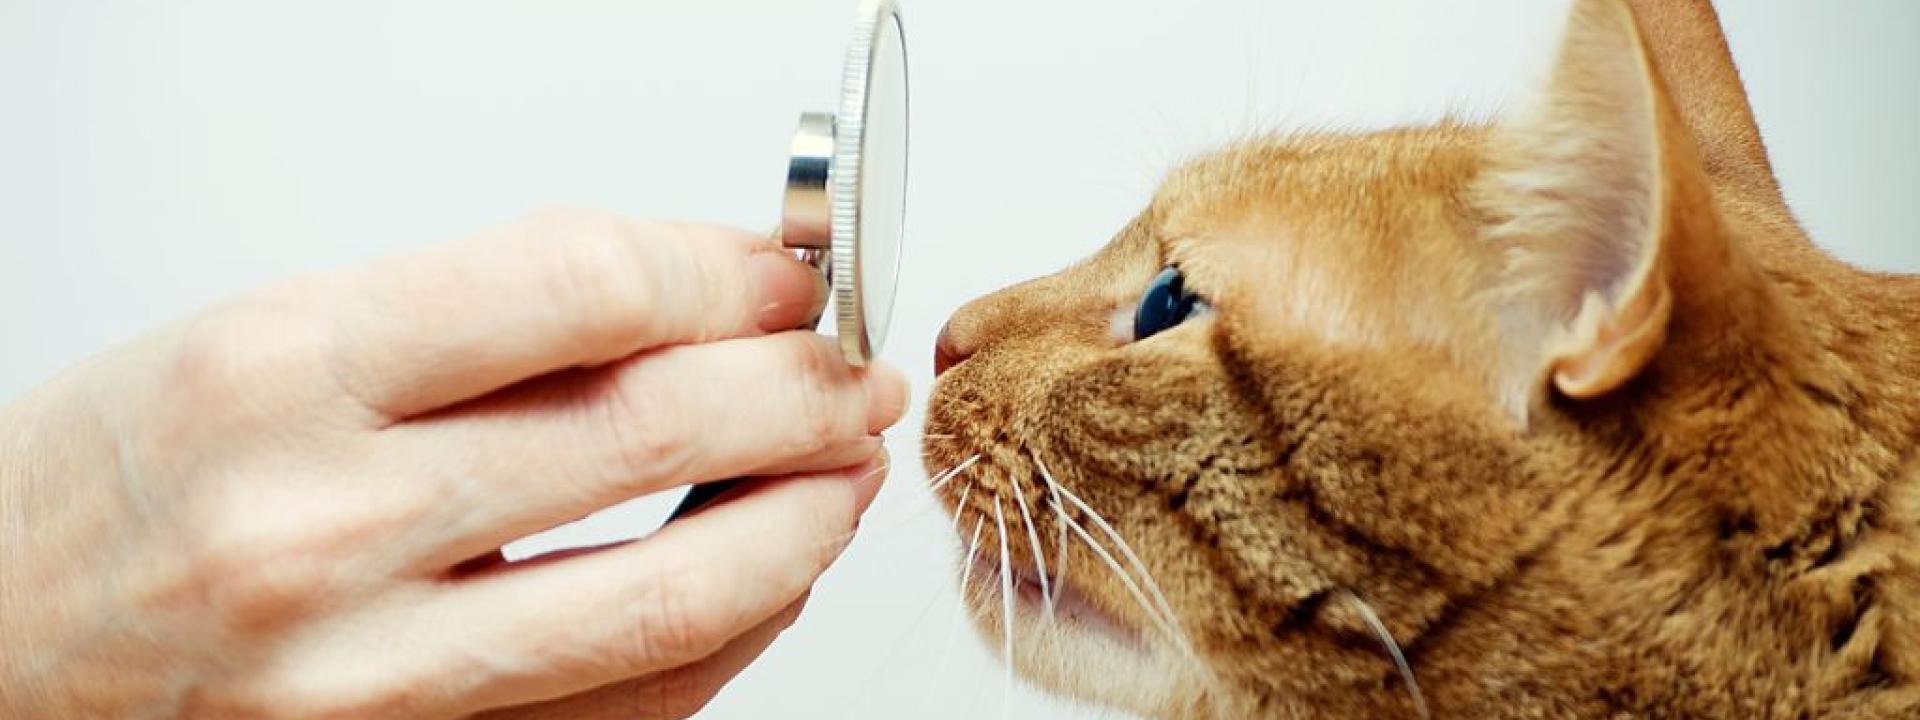 Cat sniffing a stethoscope